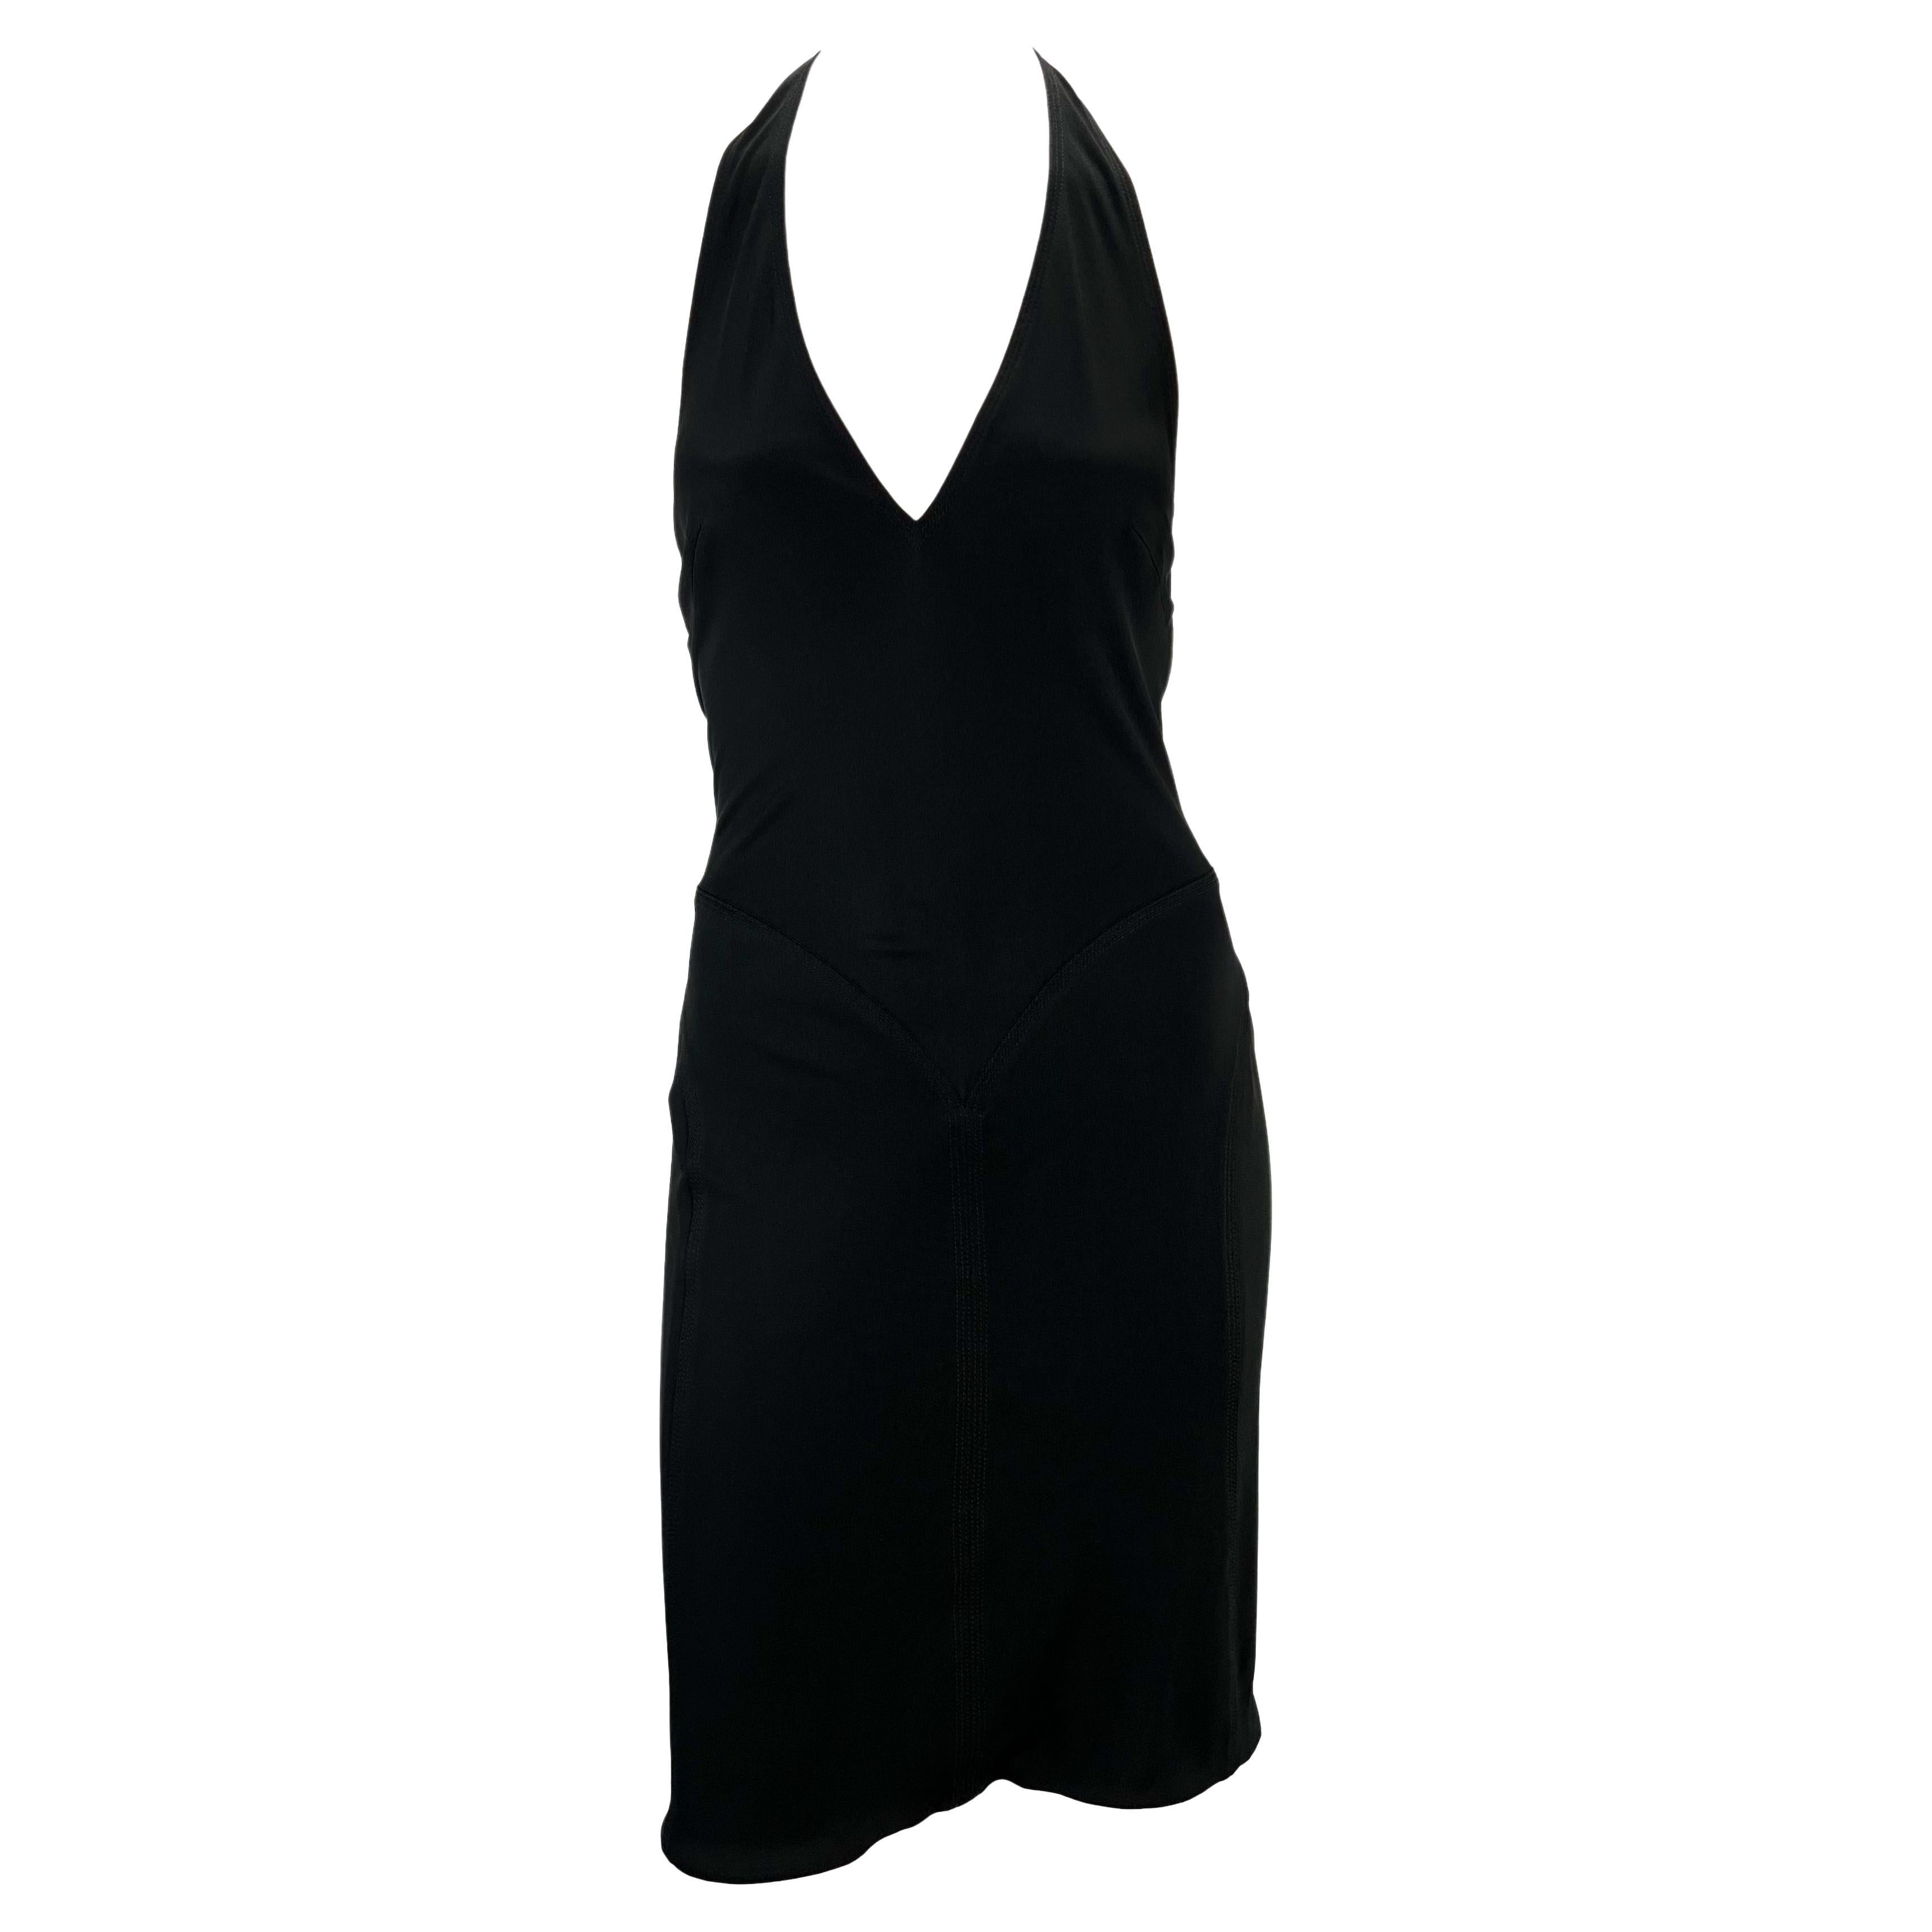 2000s Gianni Versace by Donatella Black Stretch Backless Halter Dress In Good Condition For Sale In West Hollywood, CA